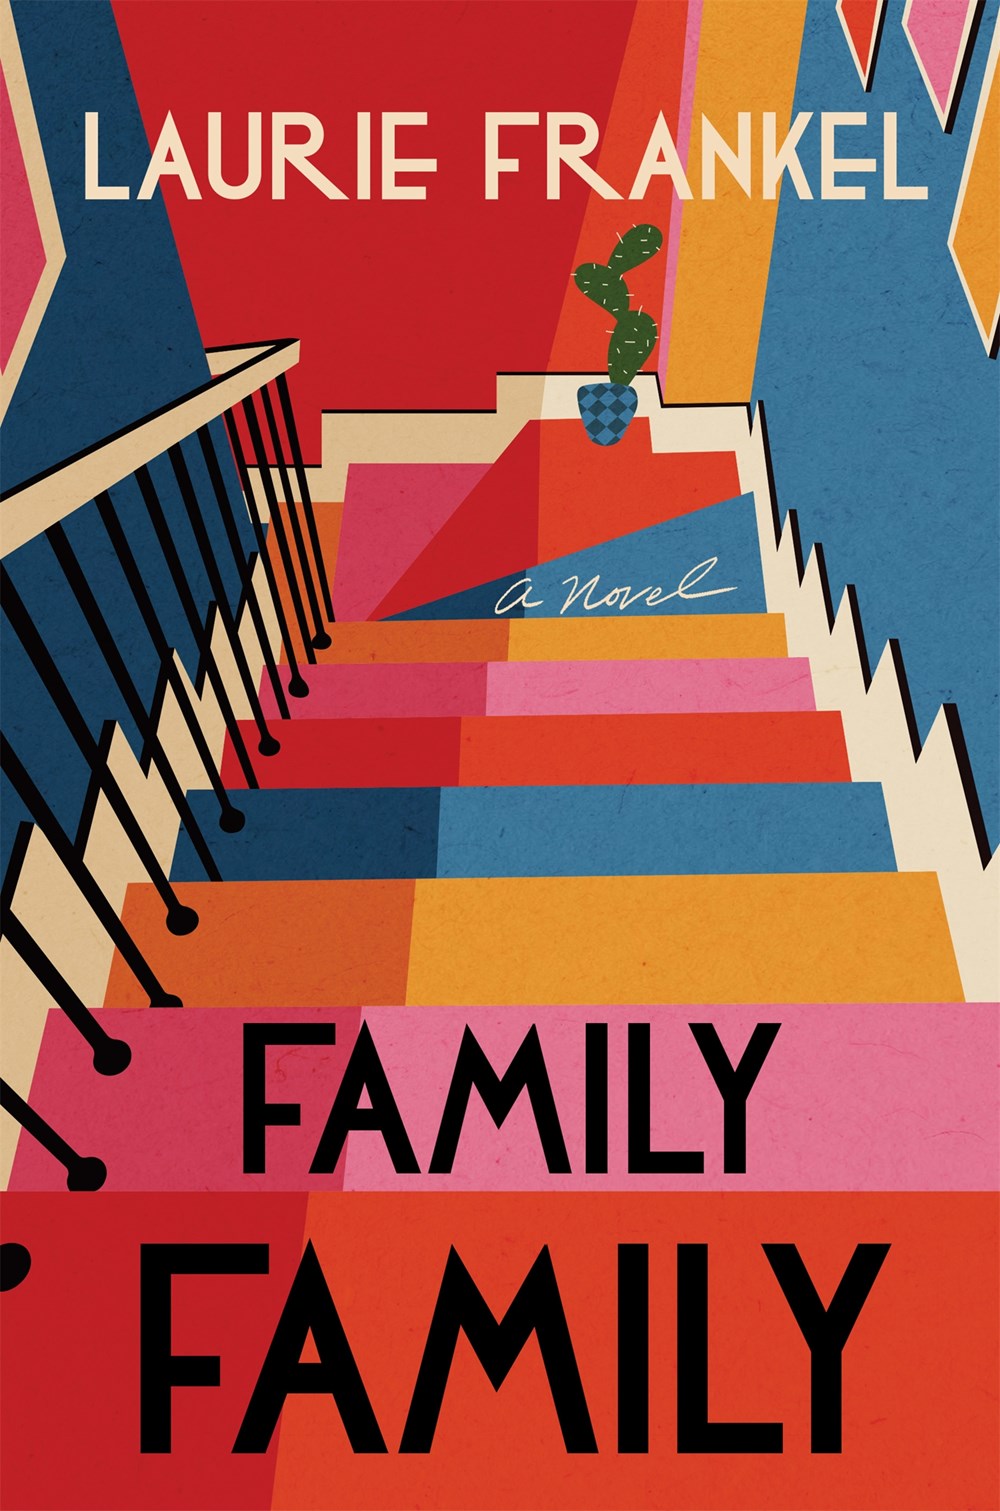 Family Family: A Novel by Laurie Frankel (1/23/24)